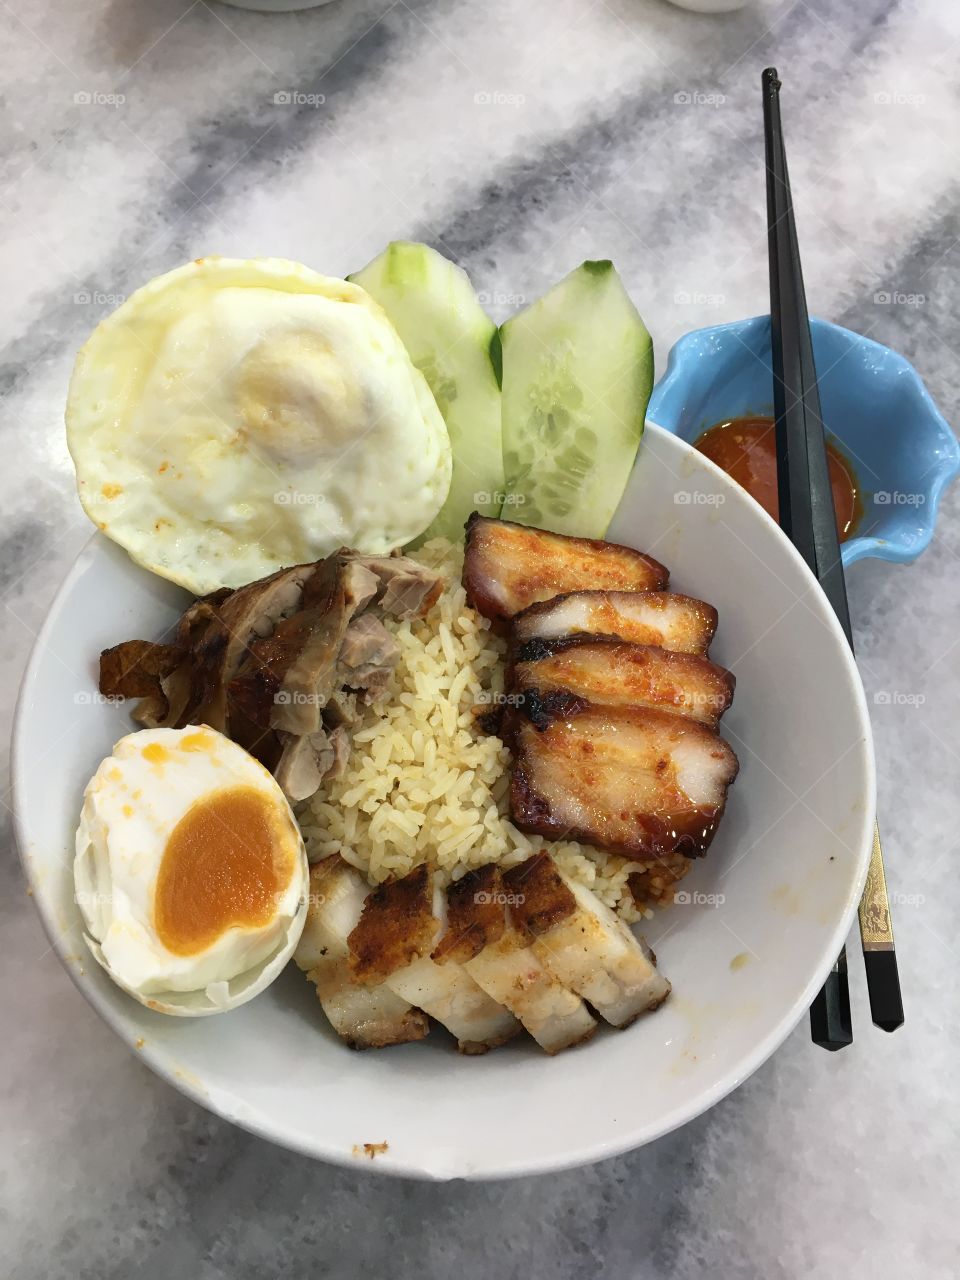 Rice with roast pork, braised pork and roast duck with fried and salted eggs